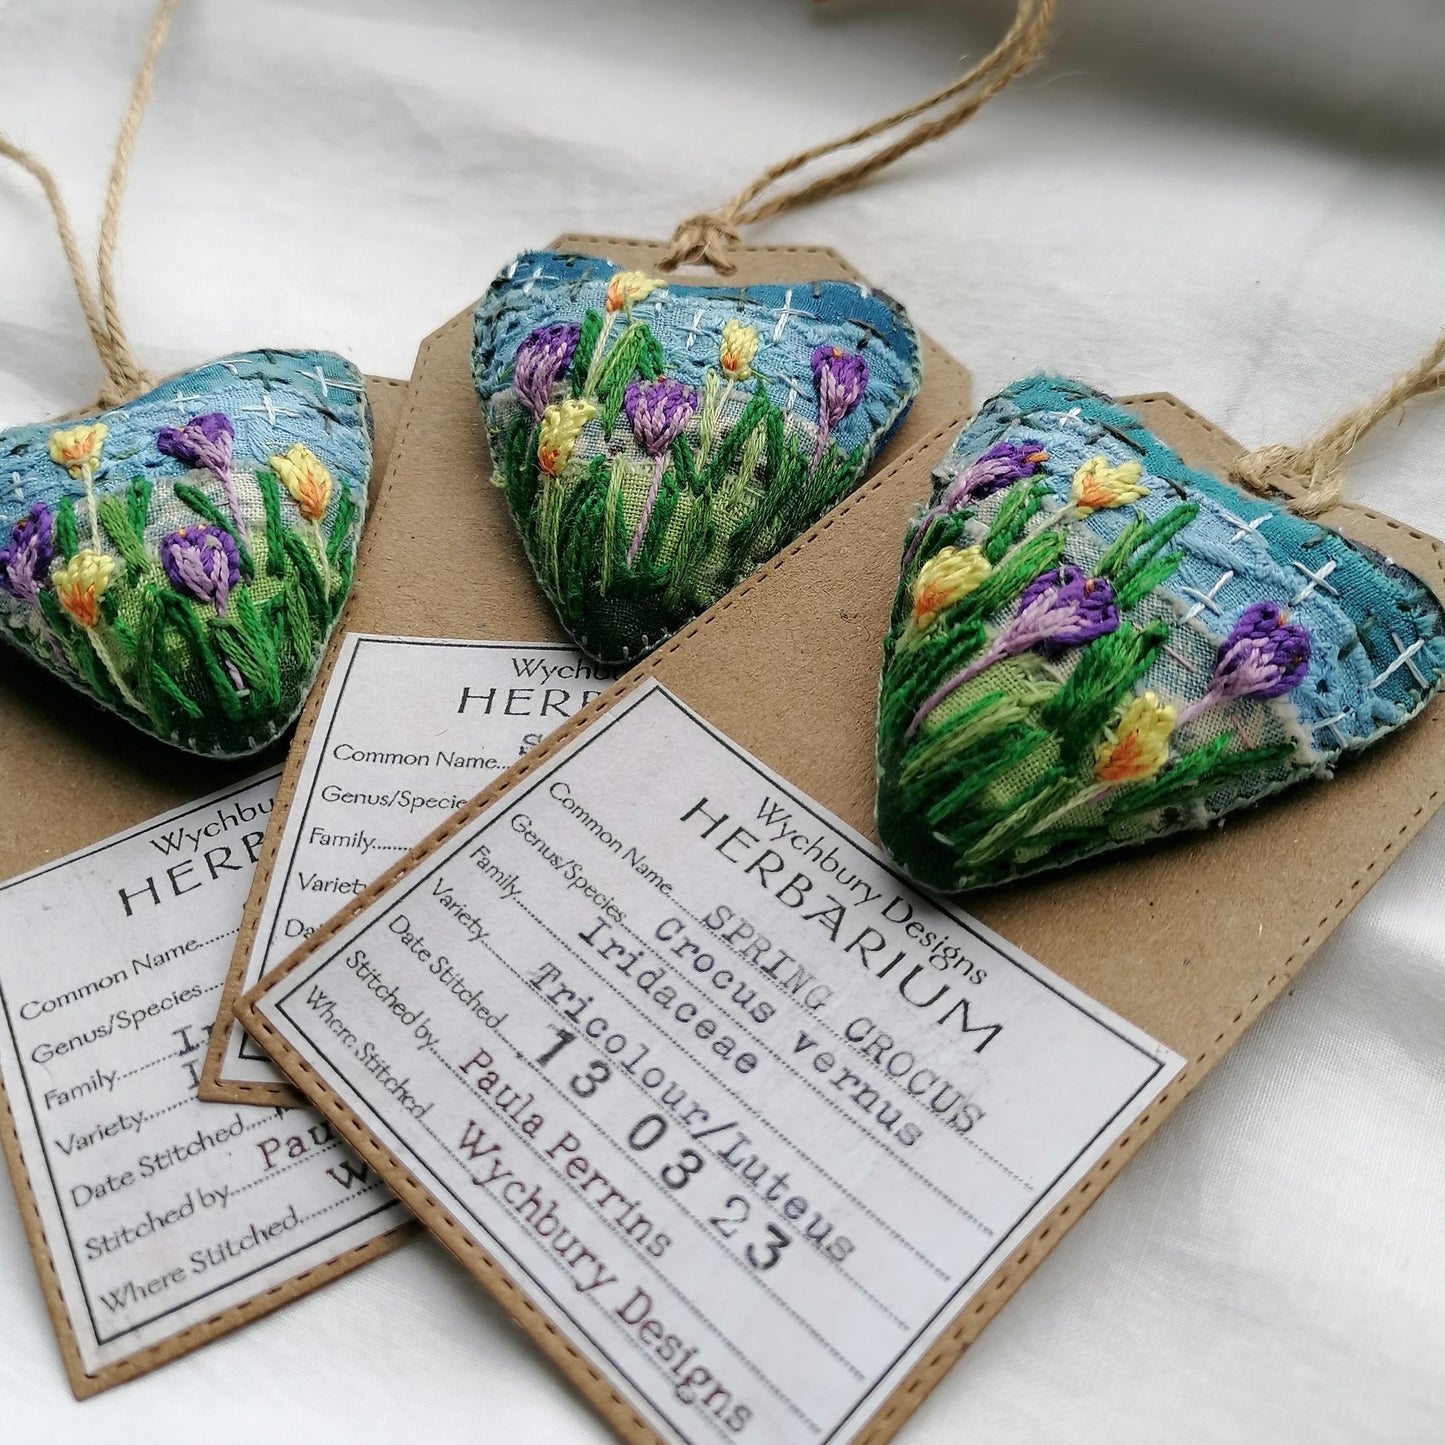 Stitched CROCUS Heart Brooches